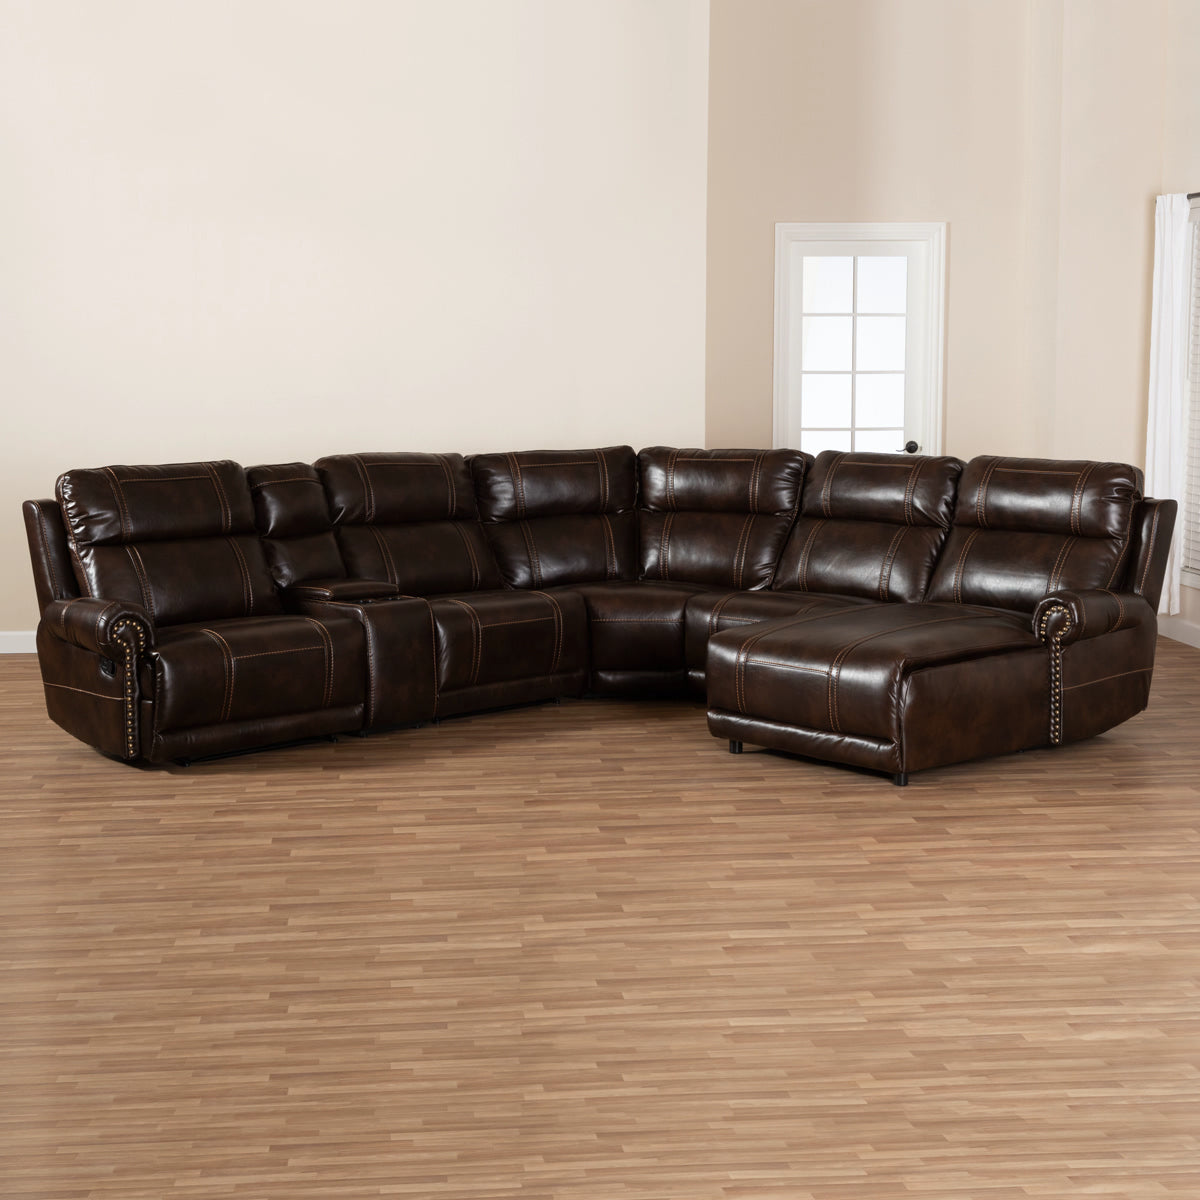 Baxton Studio Dacio Modern and Contemporary Brown Faux Leather Upholstered 6-Piece Sectional Recliner Sofa with 2 Reclining Seats Baxton Studio-sofas-Minimal And Modern - 2